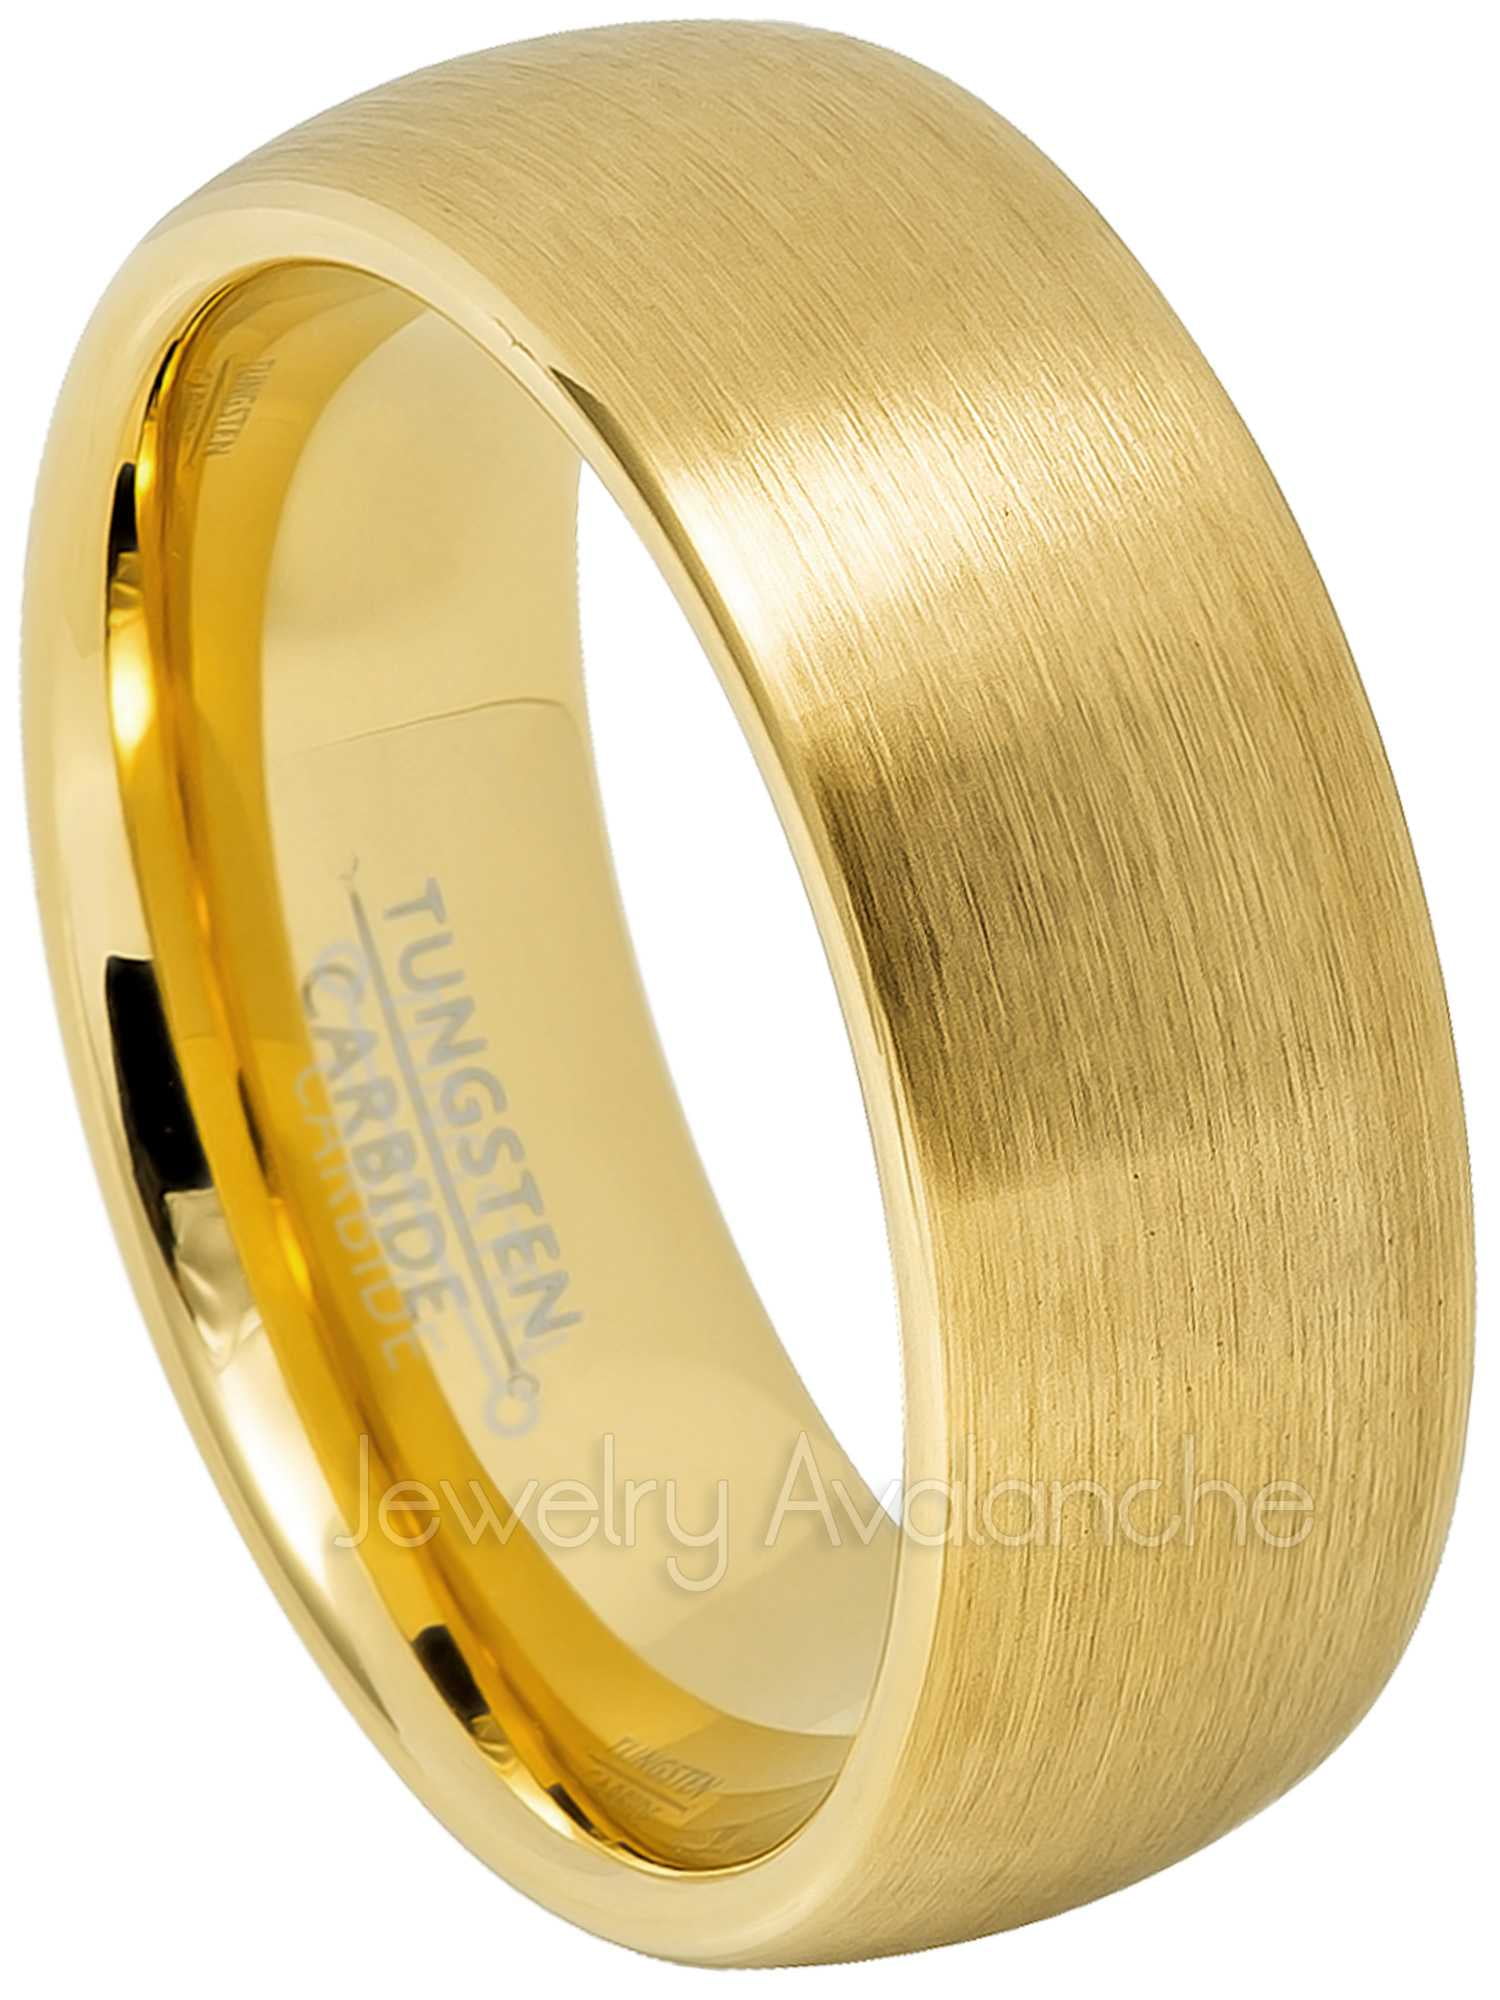 Tungsten Carbide Mens Wedding Band - Comfort Fit Brushed Yellow Gold IP ...